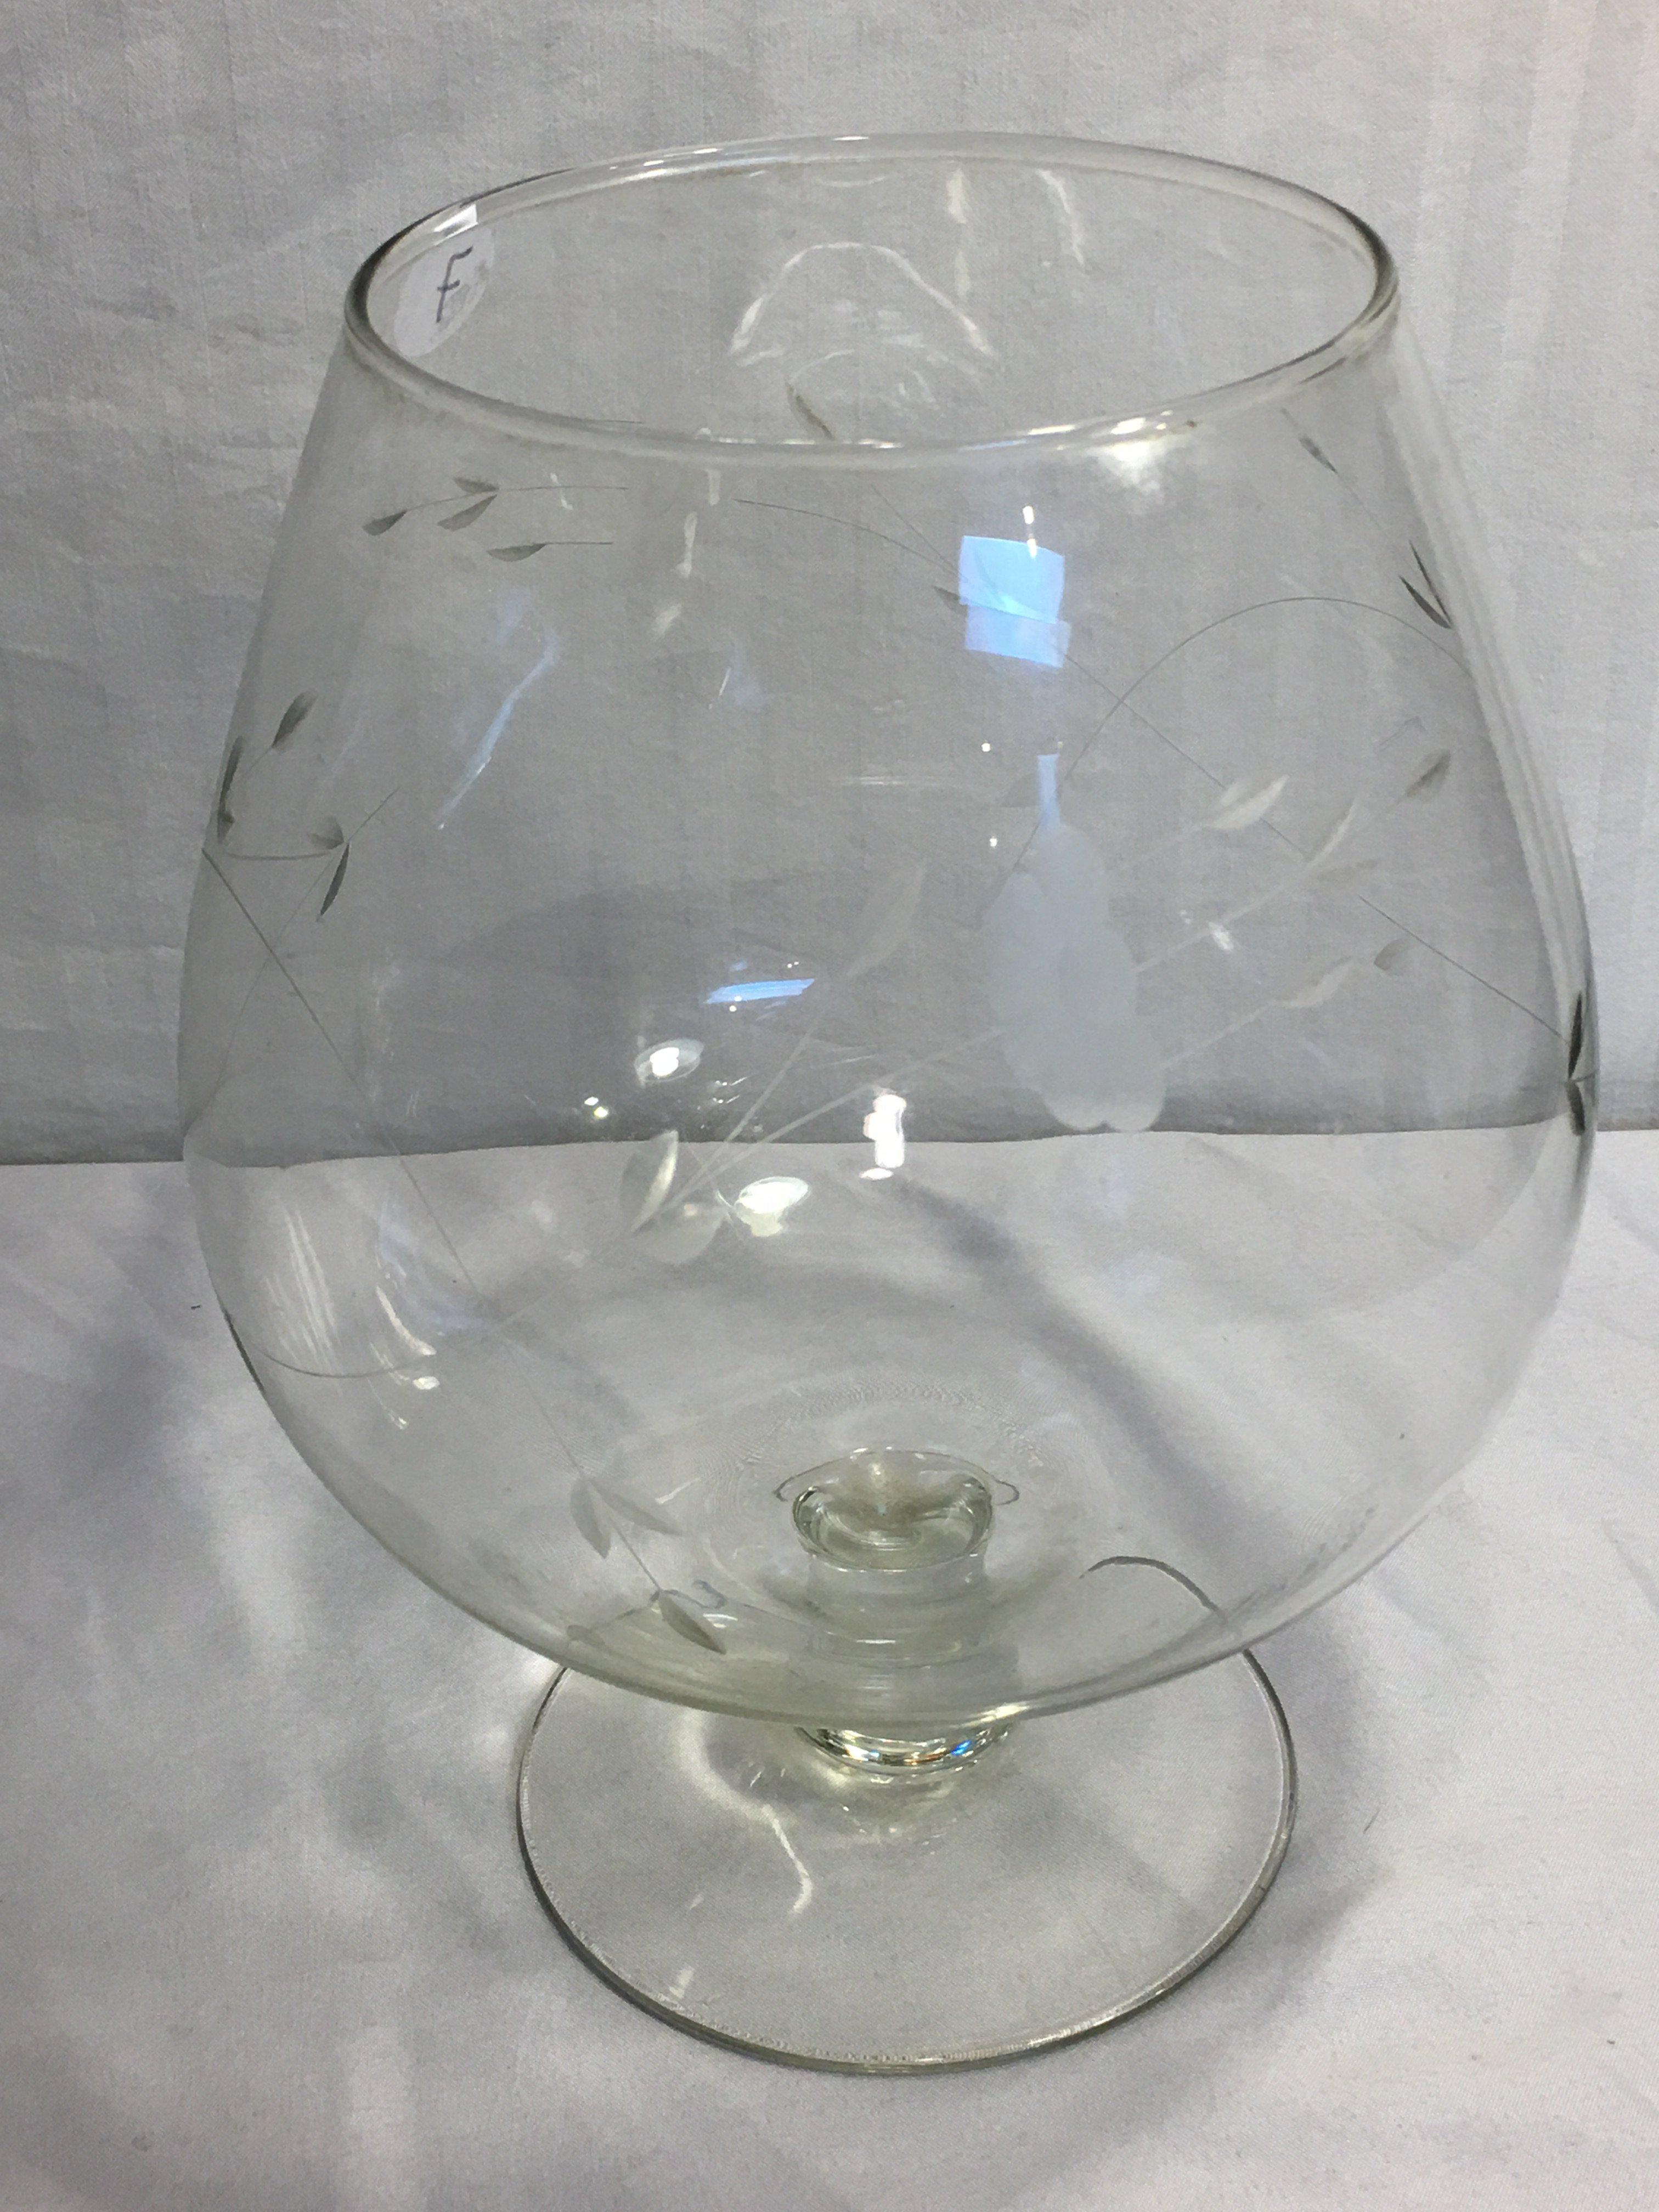 Collector Loose Princess House Heritage Large Wine Crystal Glass Size: 9-10"Tall - See Pictures